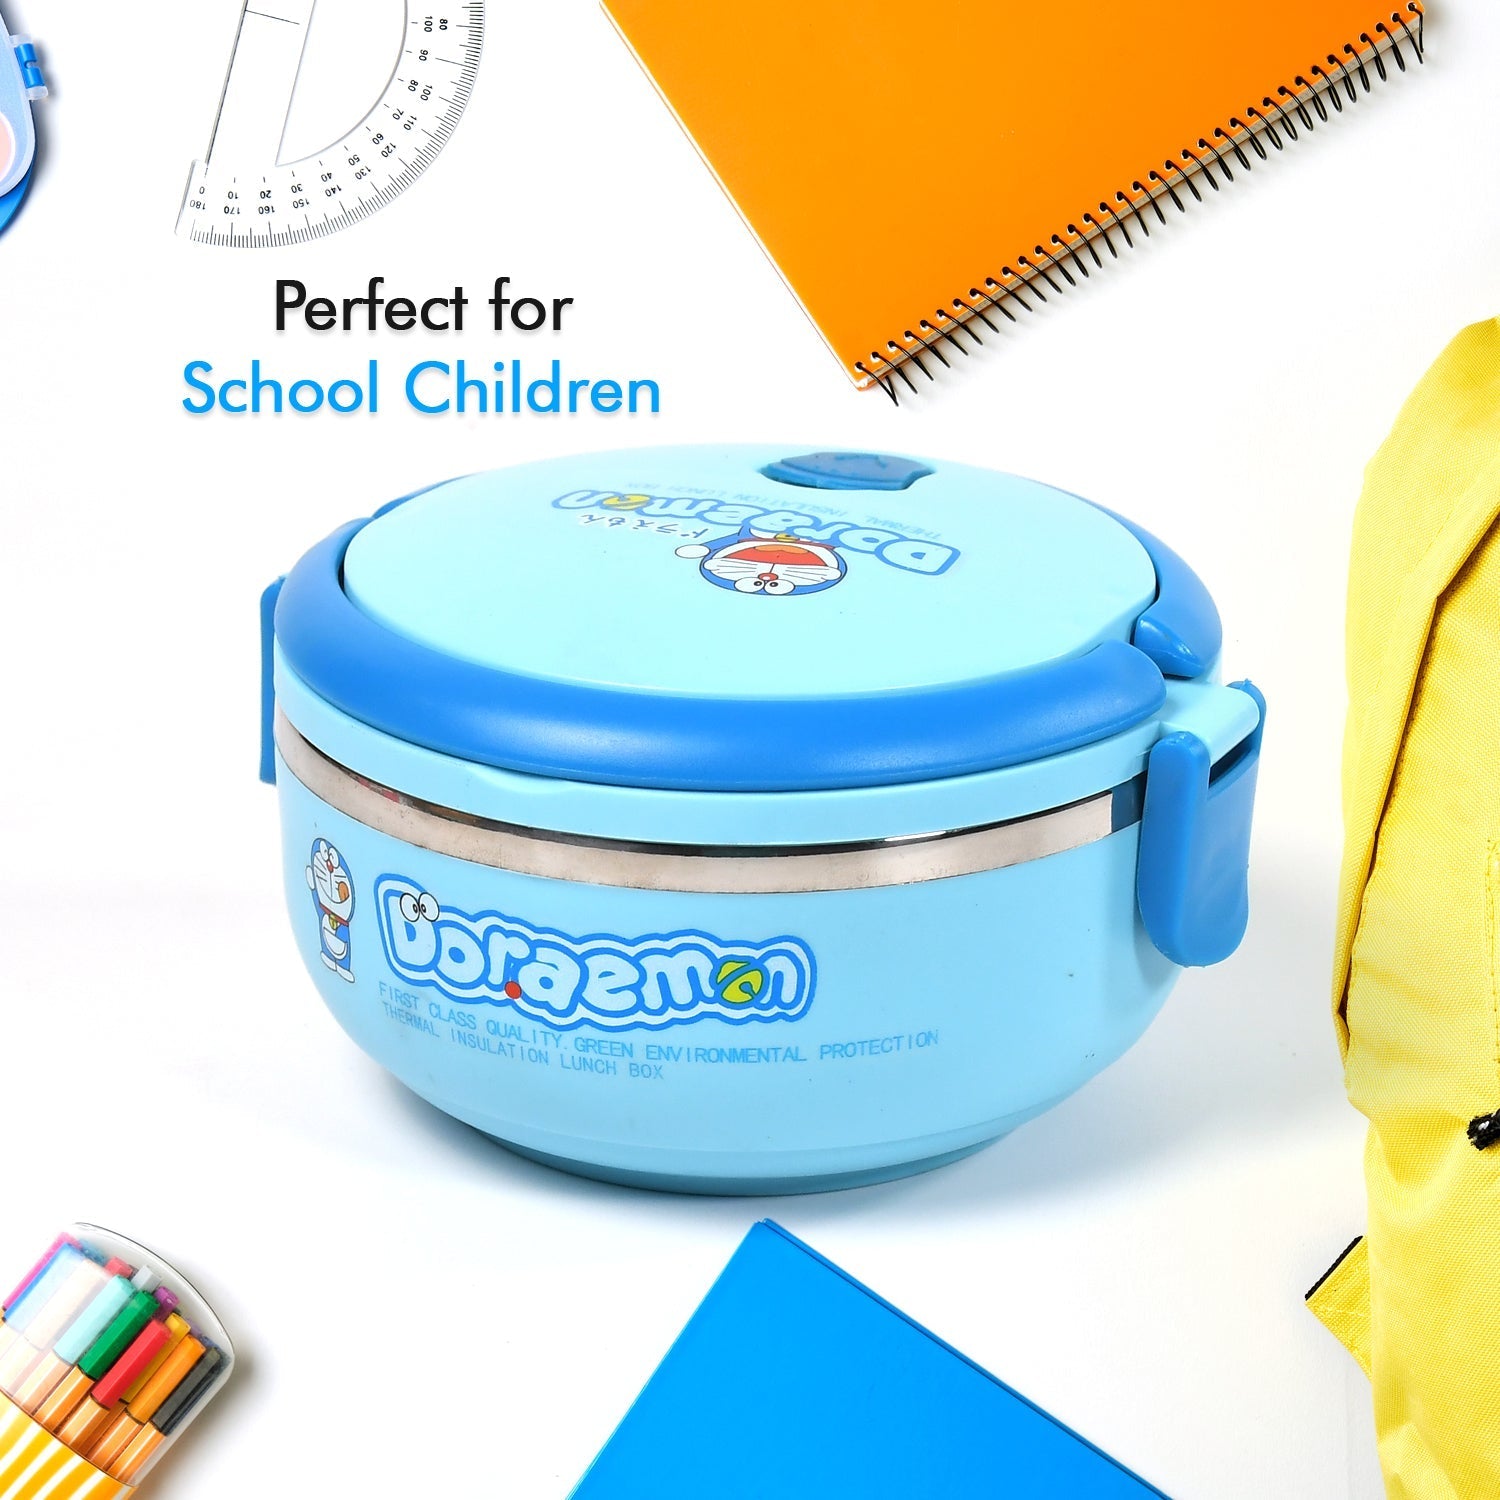 2874A Single Layer Doraemon Steel Lunch Box High Quality Premium Lunch Box  For Office & School Use 